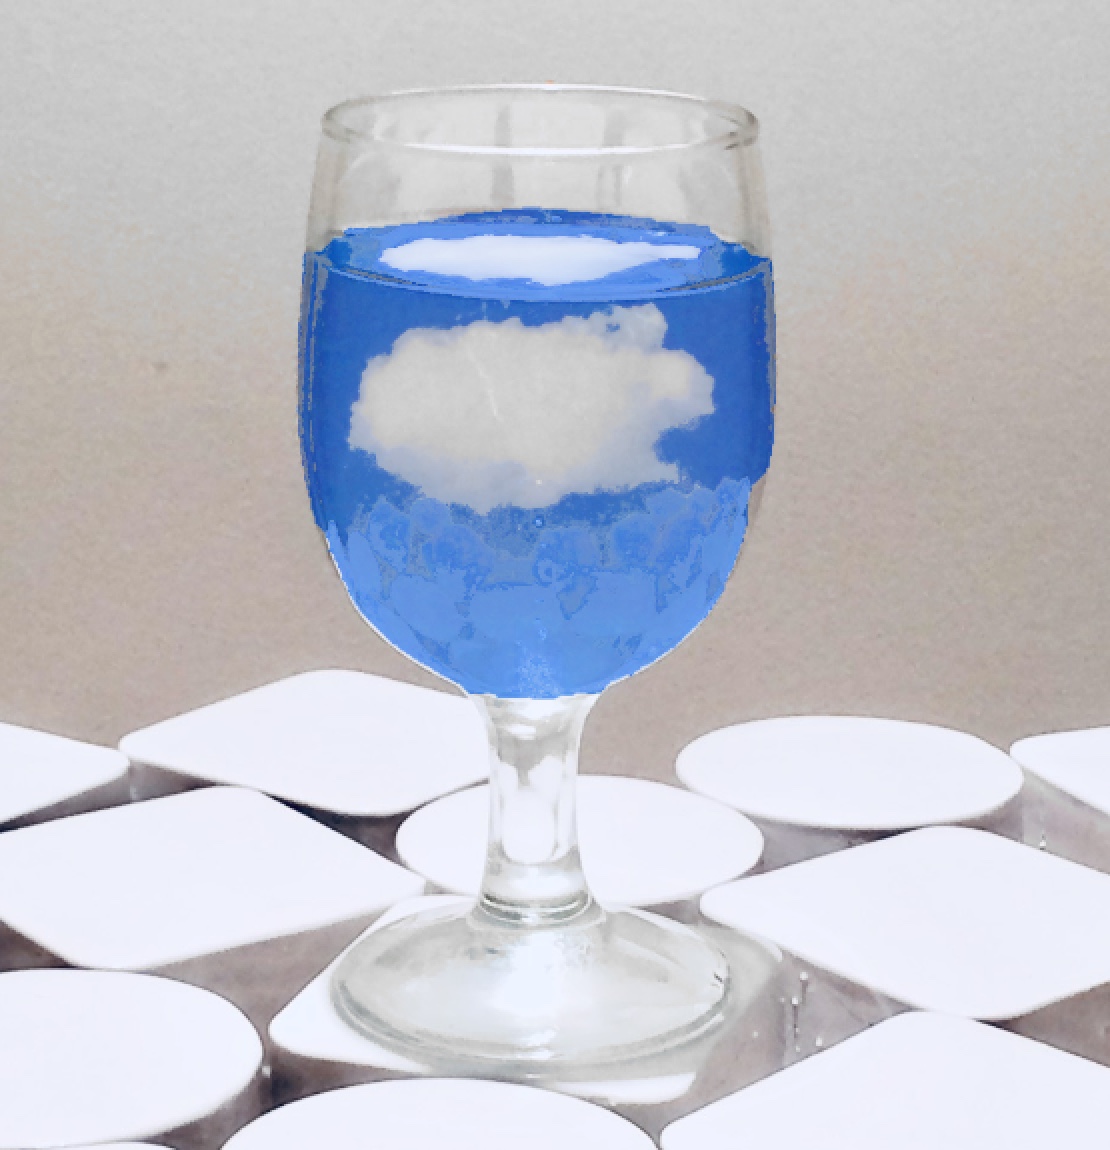 cloud, glass, cloud in glass, drink cloud, surreal, surreal image